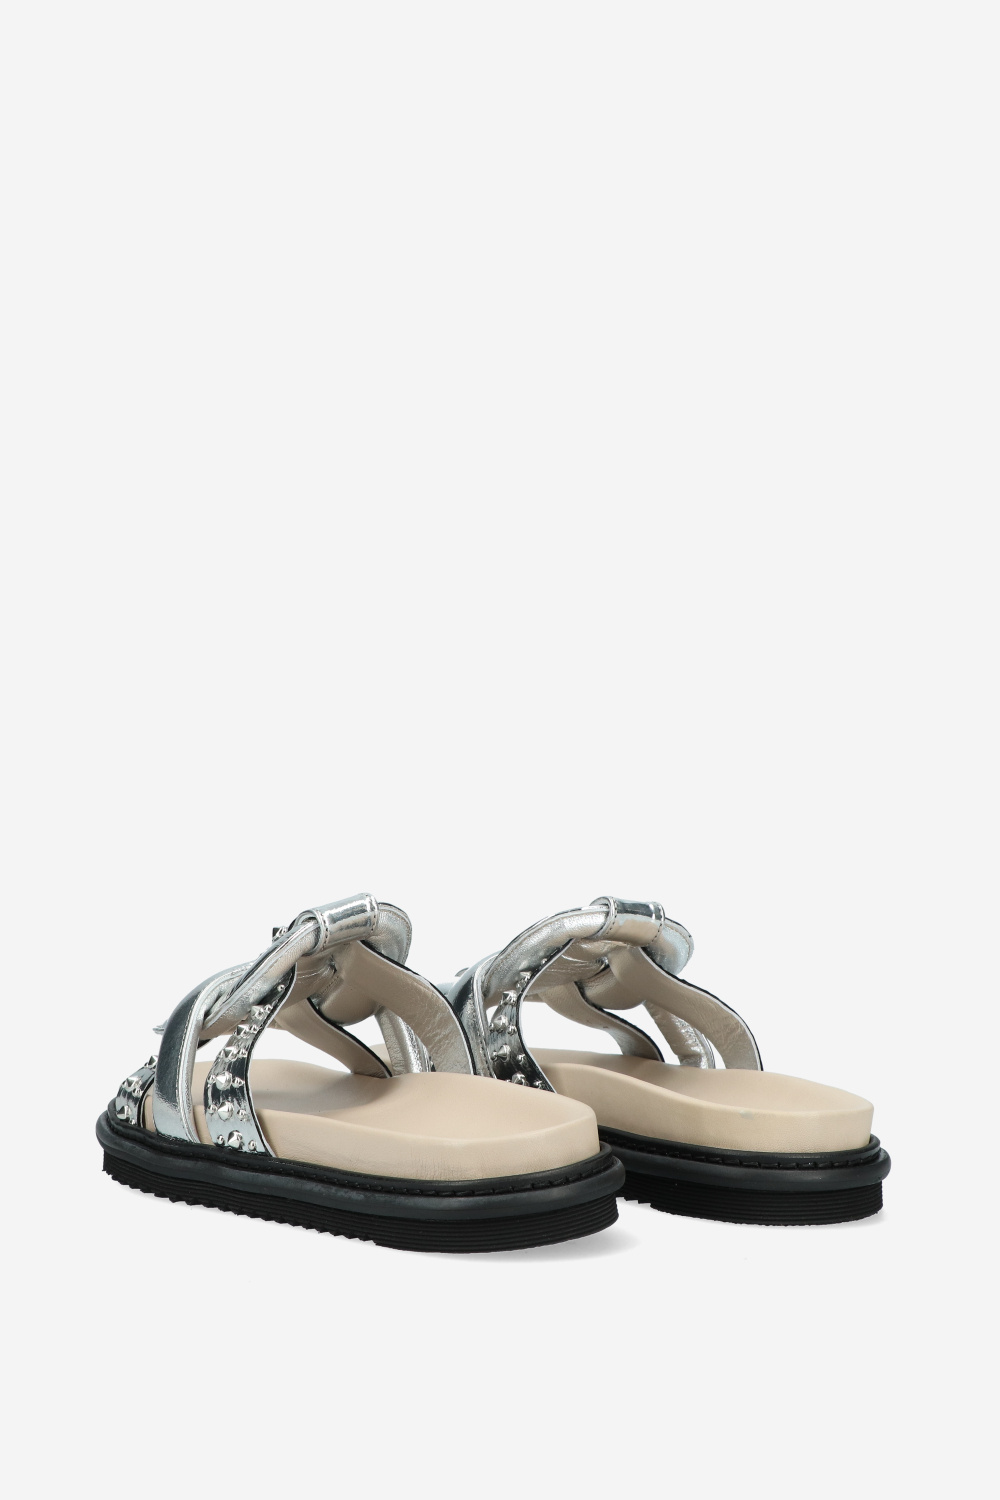 Morobe Sandals Silver